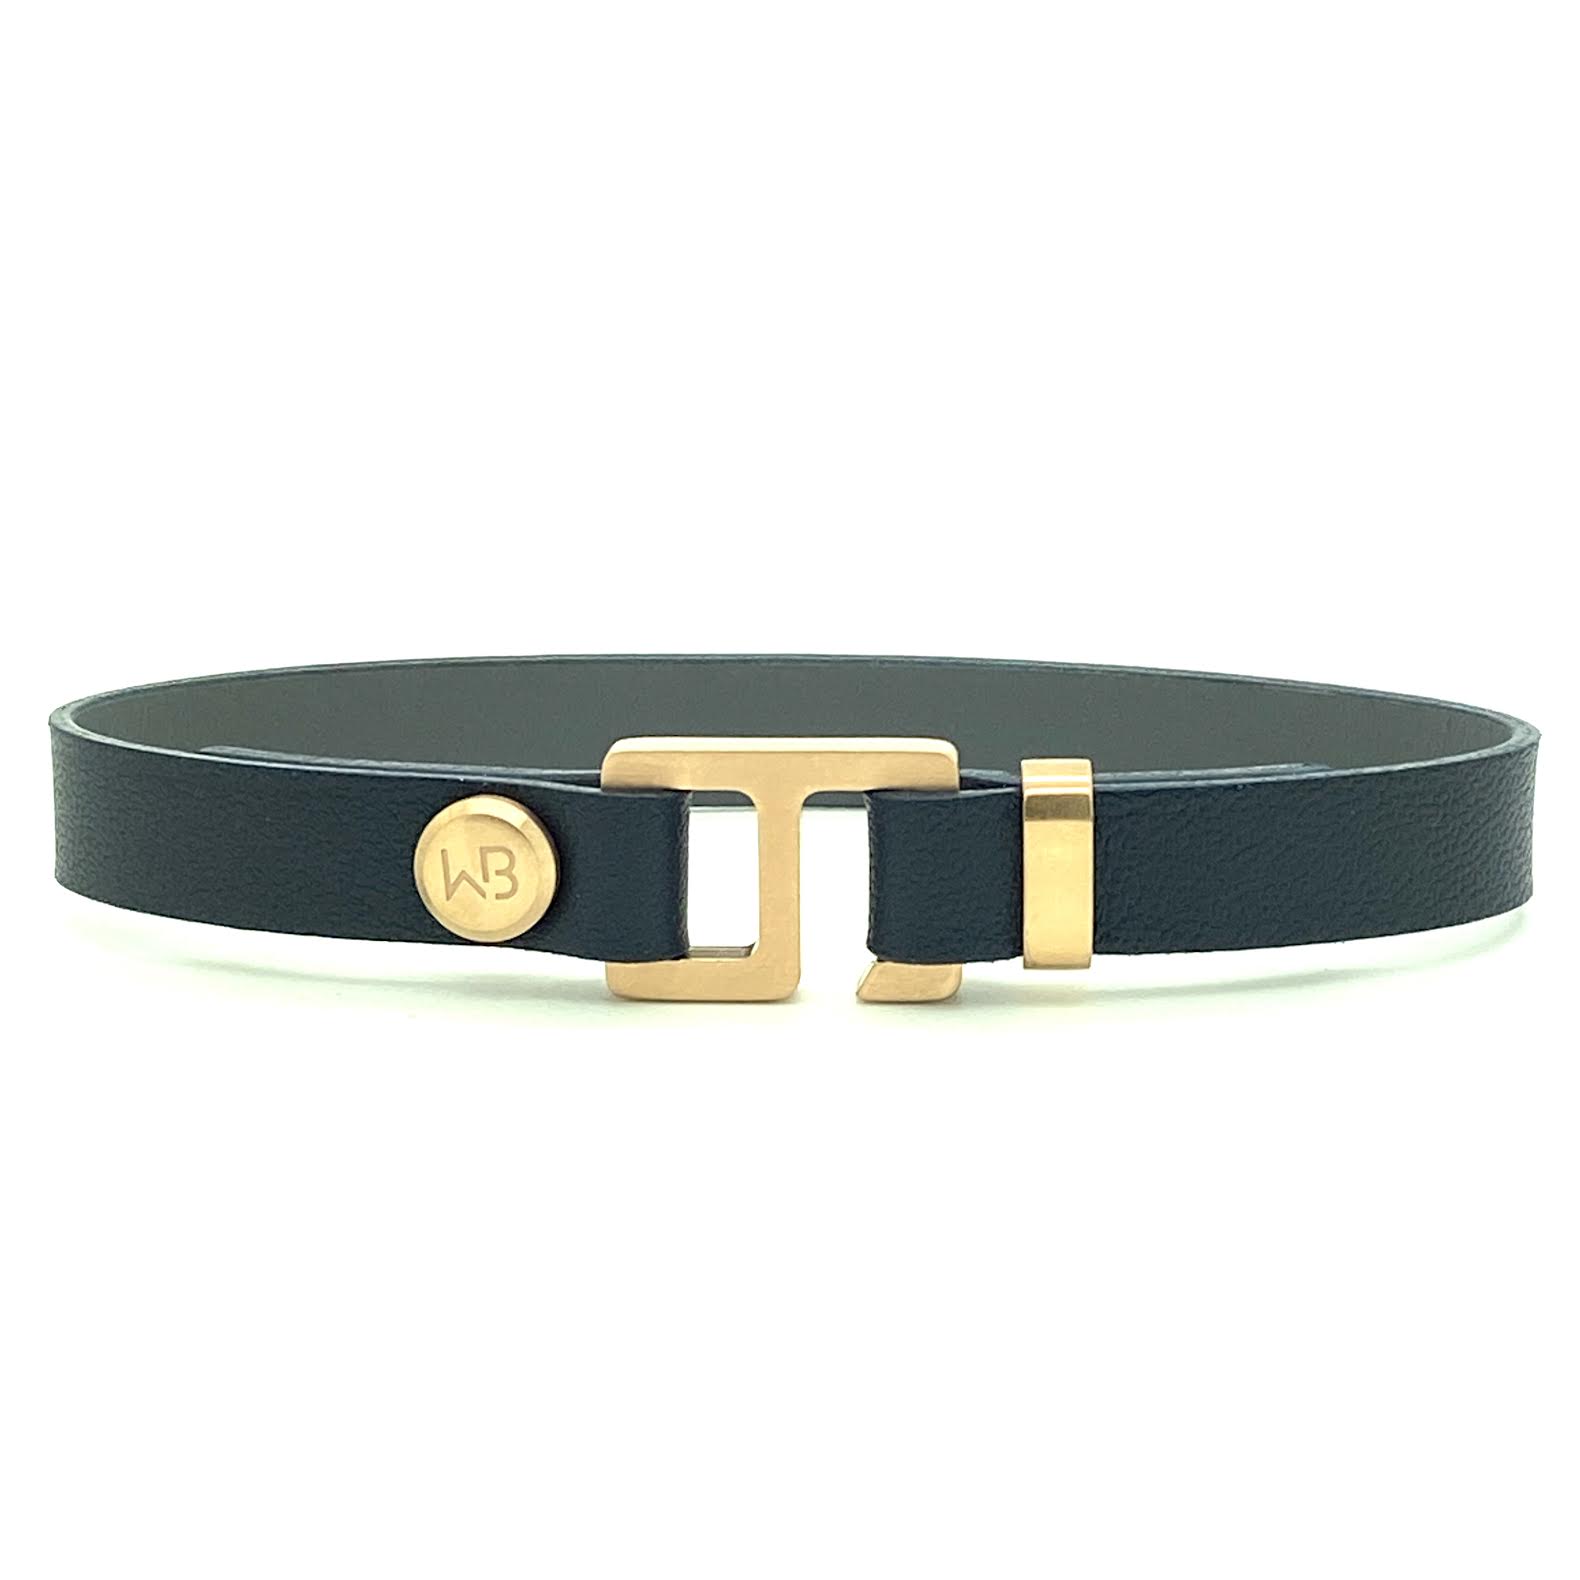 With a trendy, cool modern vibe, this navy blue/ charcoal grey leather cuff bracelet is paired with your choice of brushed stainless steel, brass or black ceramic hardware. Our signature cuff bracelet is a modern staple for your WristBend collection. Made by WristBend